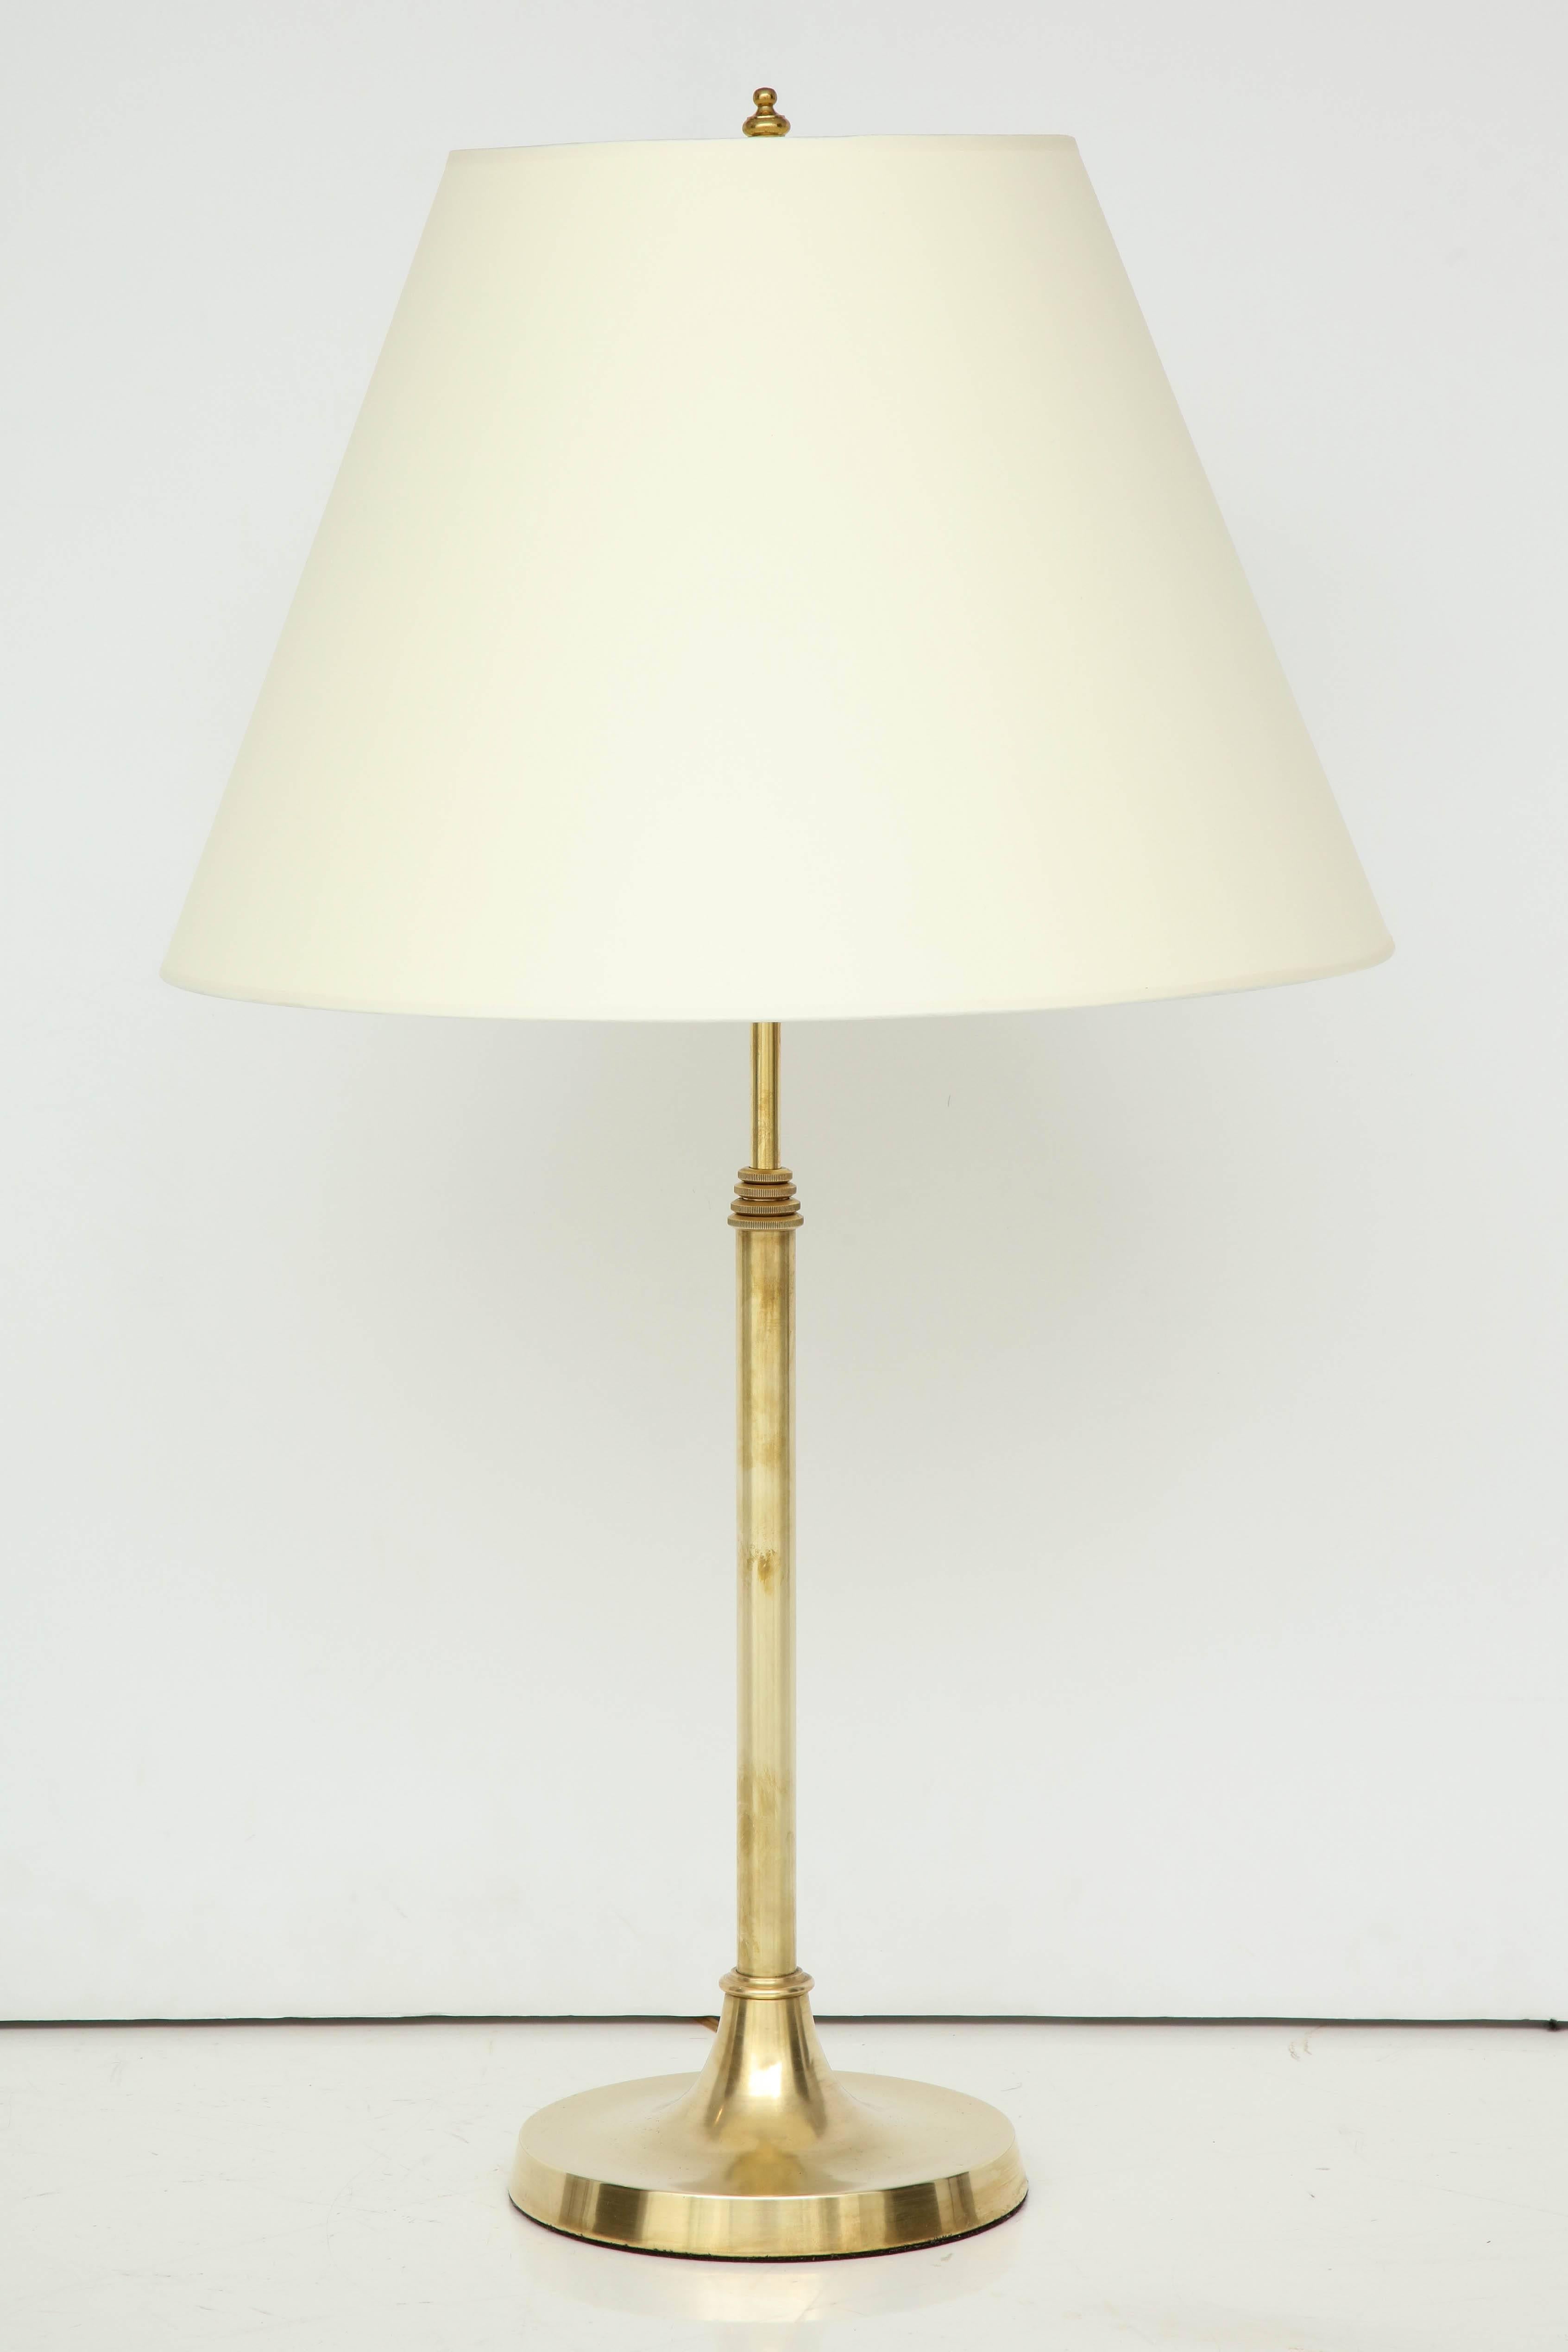 A Danish brass telescopic lamp with a sectional tapered stem and circular base, circa 1940s. Probably designed by Aage Petersen (Danish, 1902–1982)
Good brass finish, re-wired for the US.